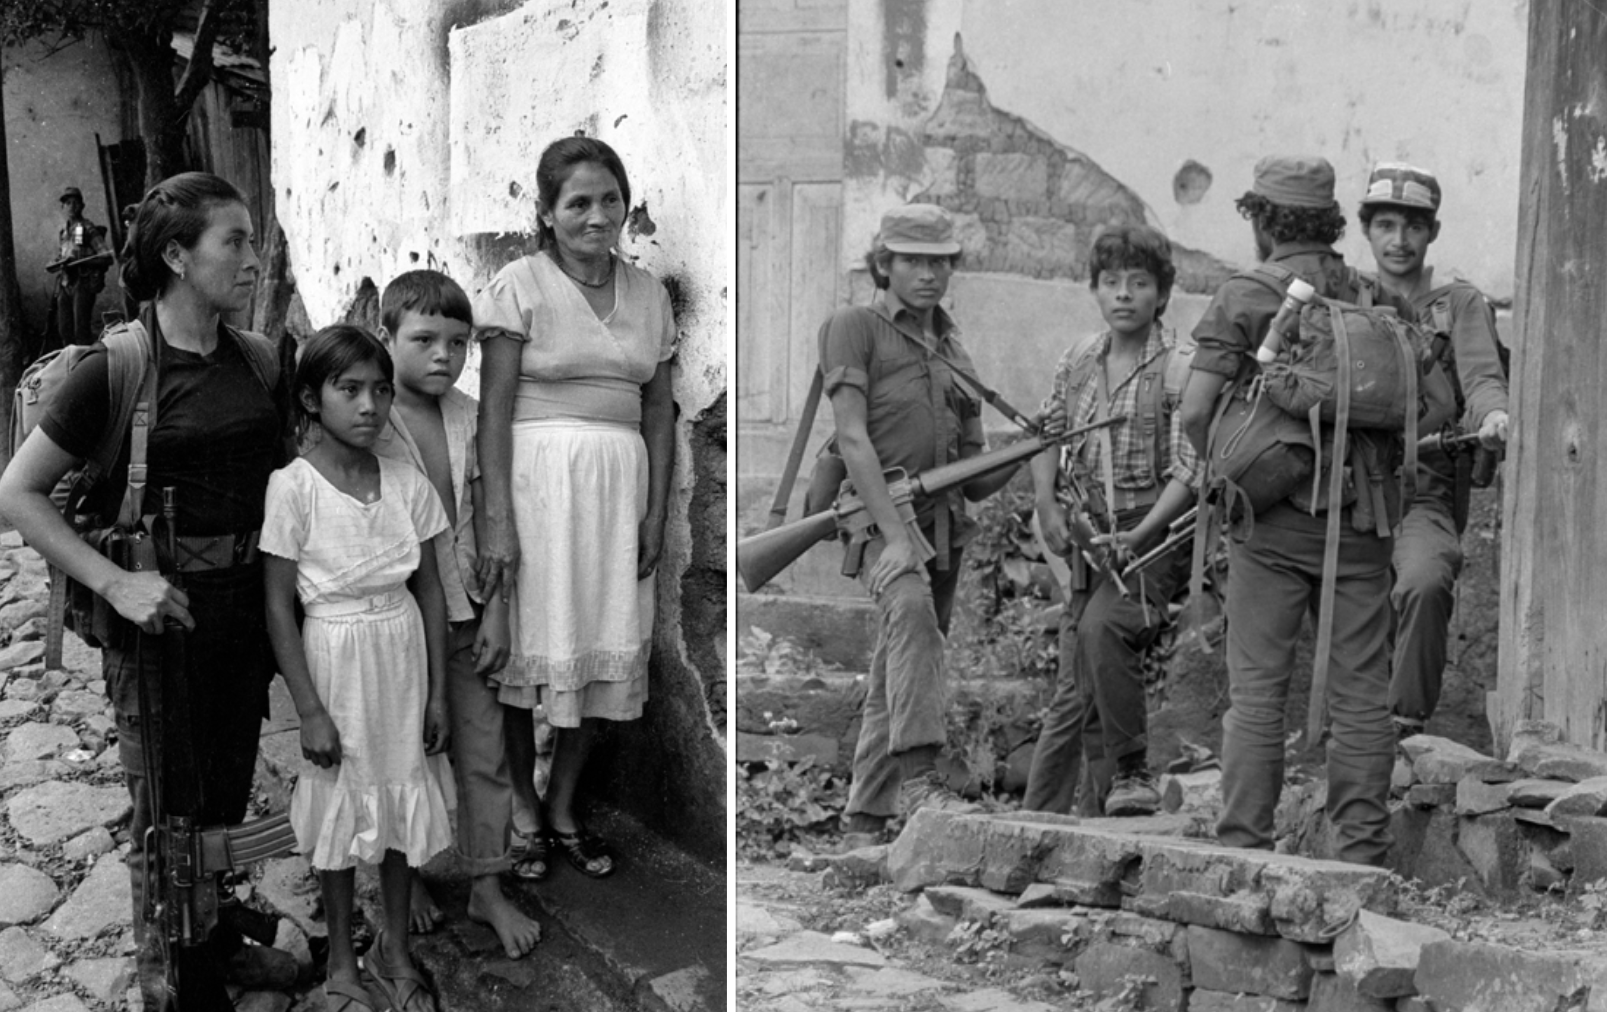 Ejército Revolucionario del Pueblo (ERP) combatants in 1990 (left) and (right). The People's Revolutionary Army was one of the groups that made up the Farabundo Martí National Liberation Front (FMLN).